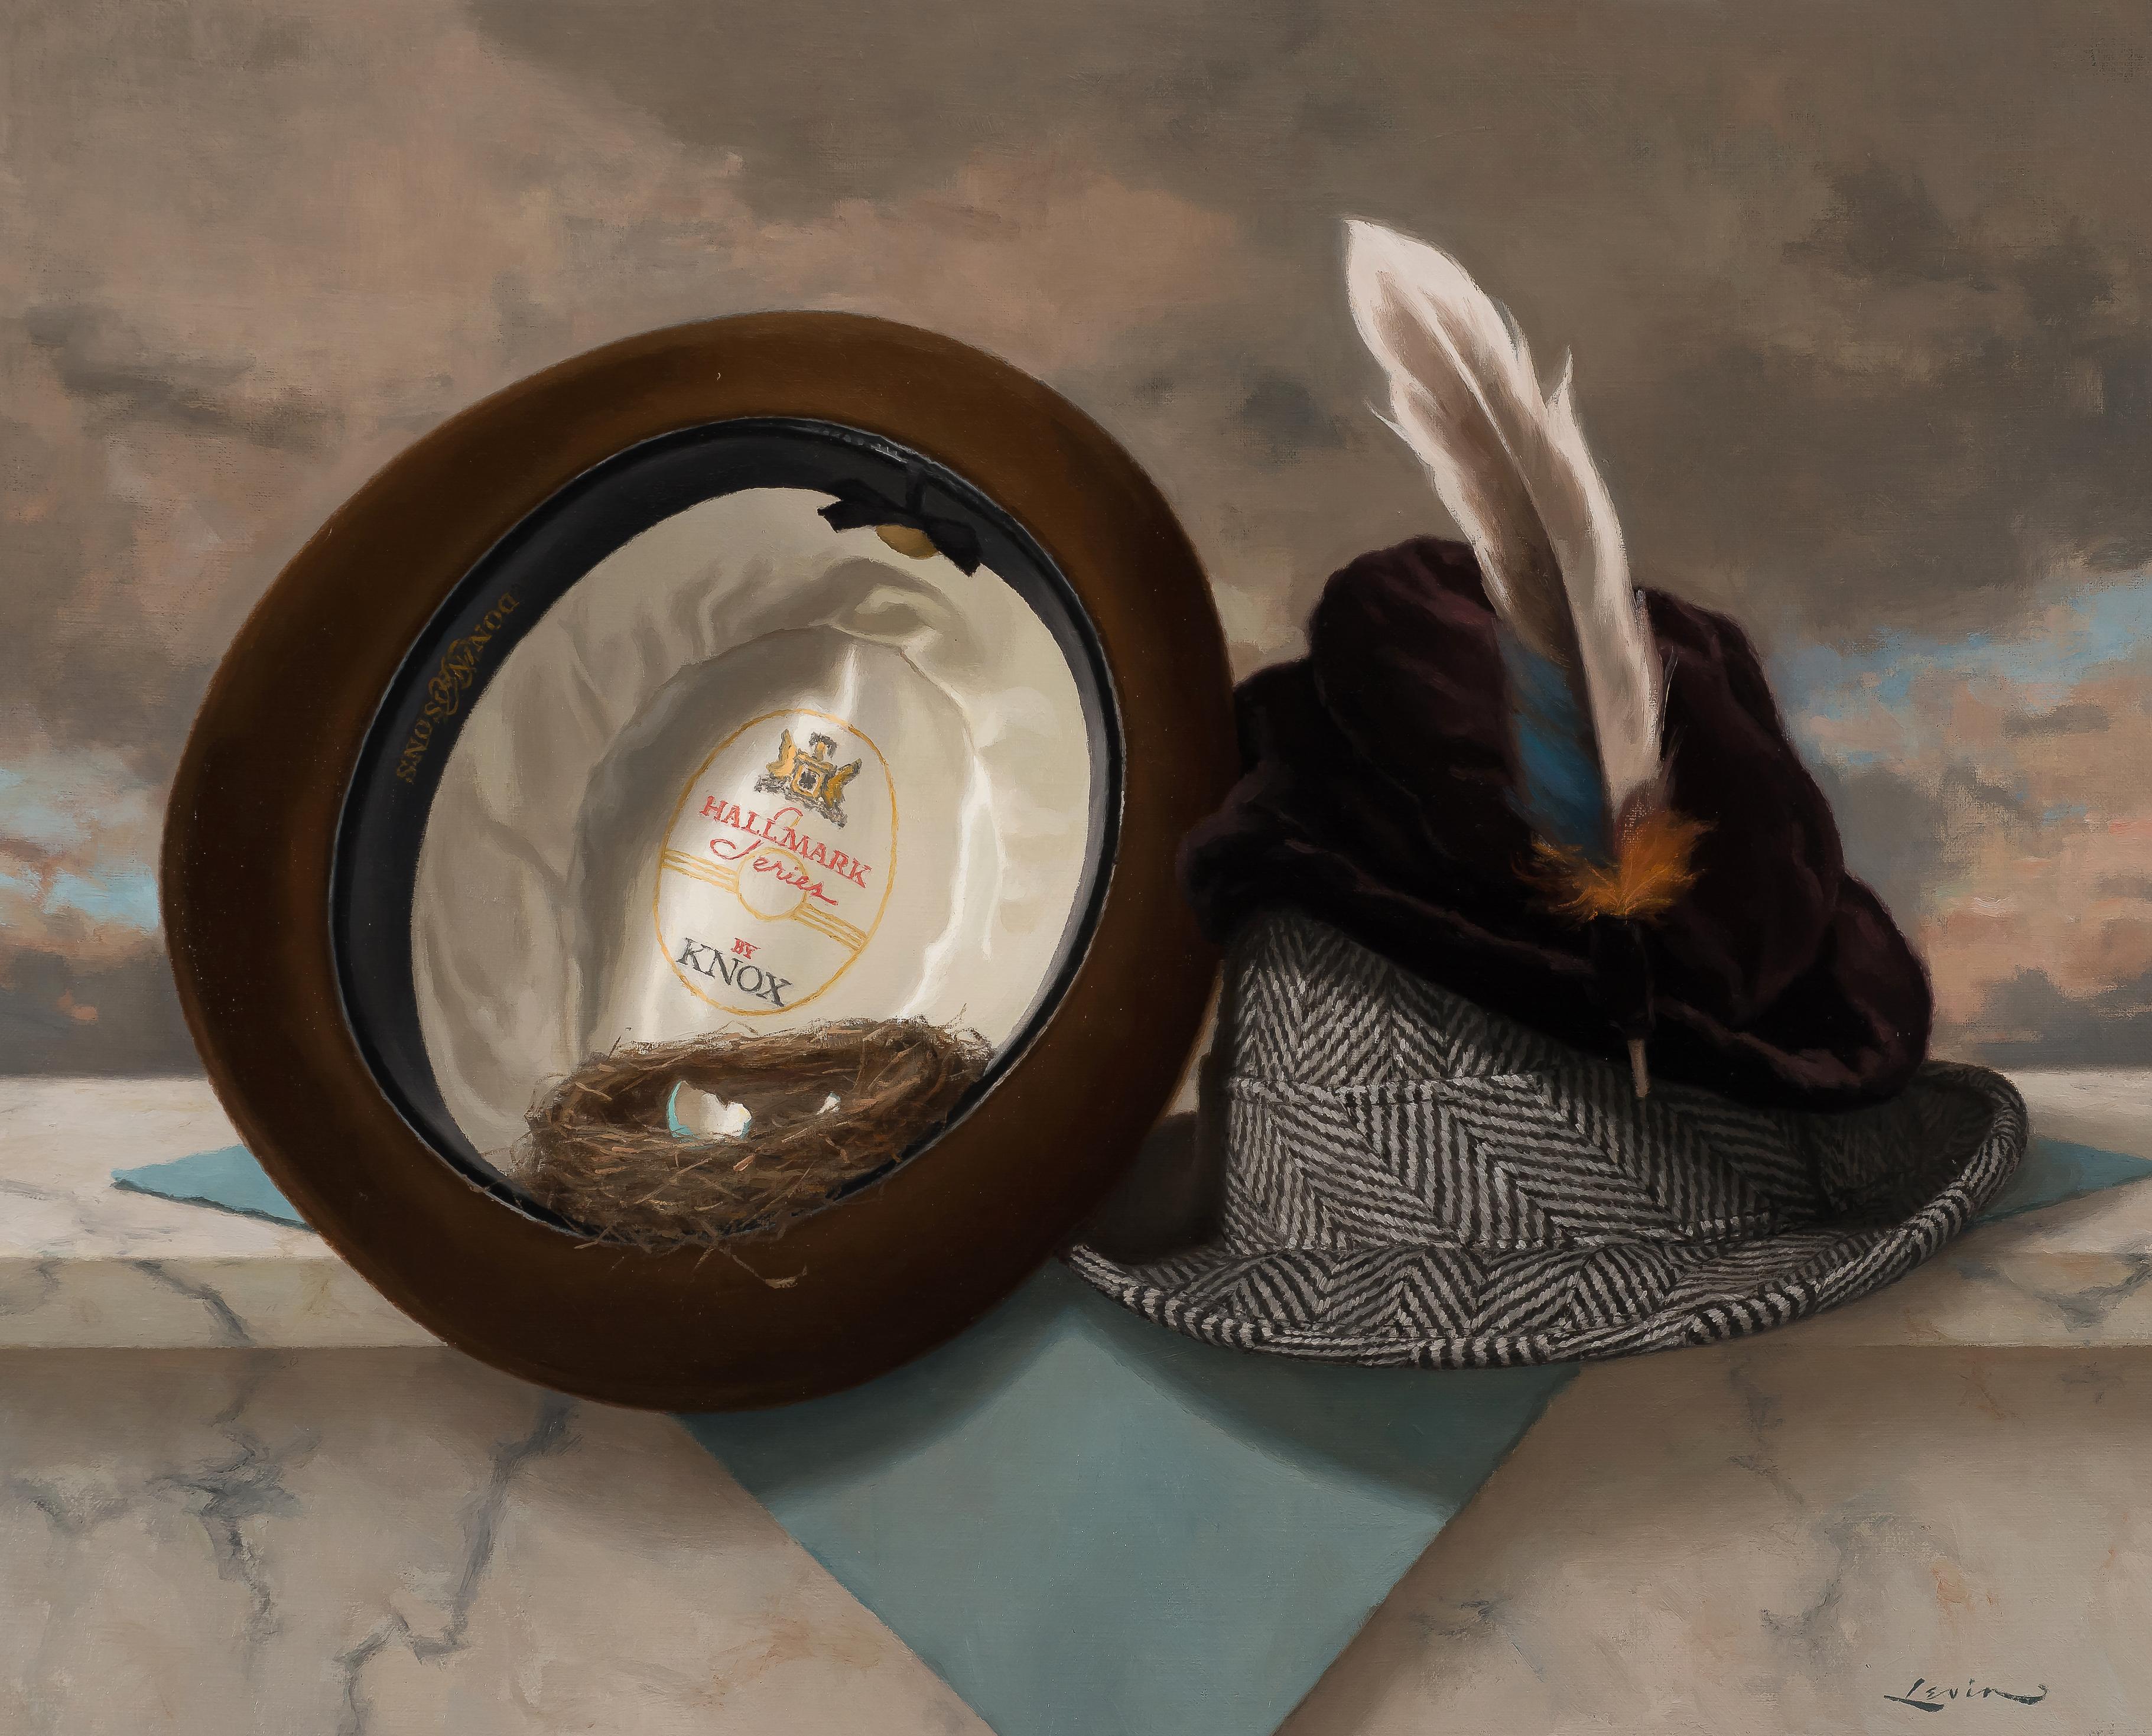 Steven J. Levin Landscape Painting - "Three Hats" classical still life with birds nest and egg